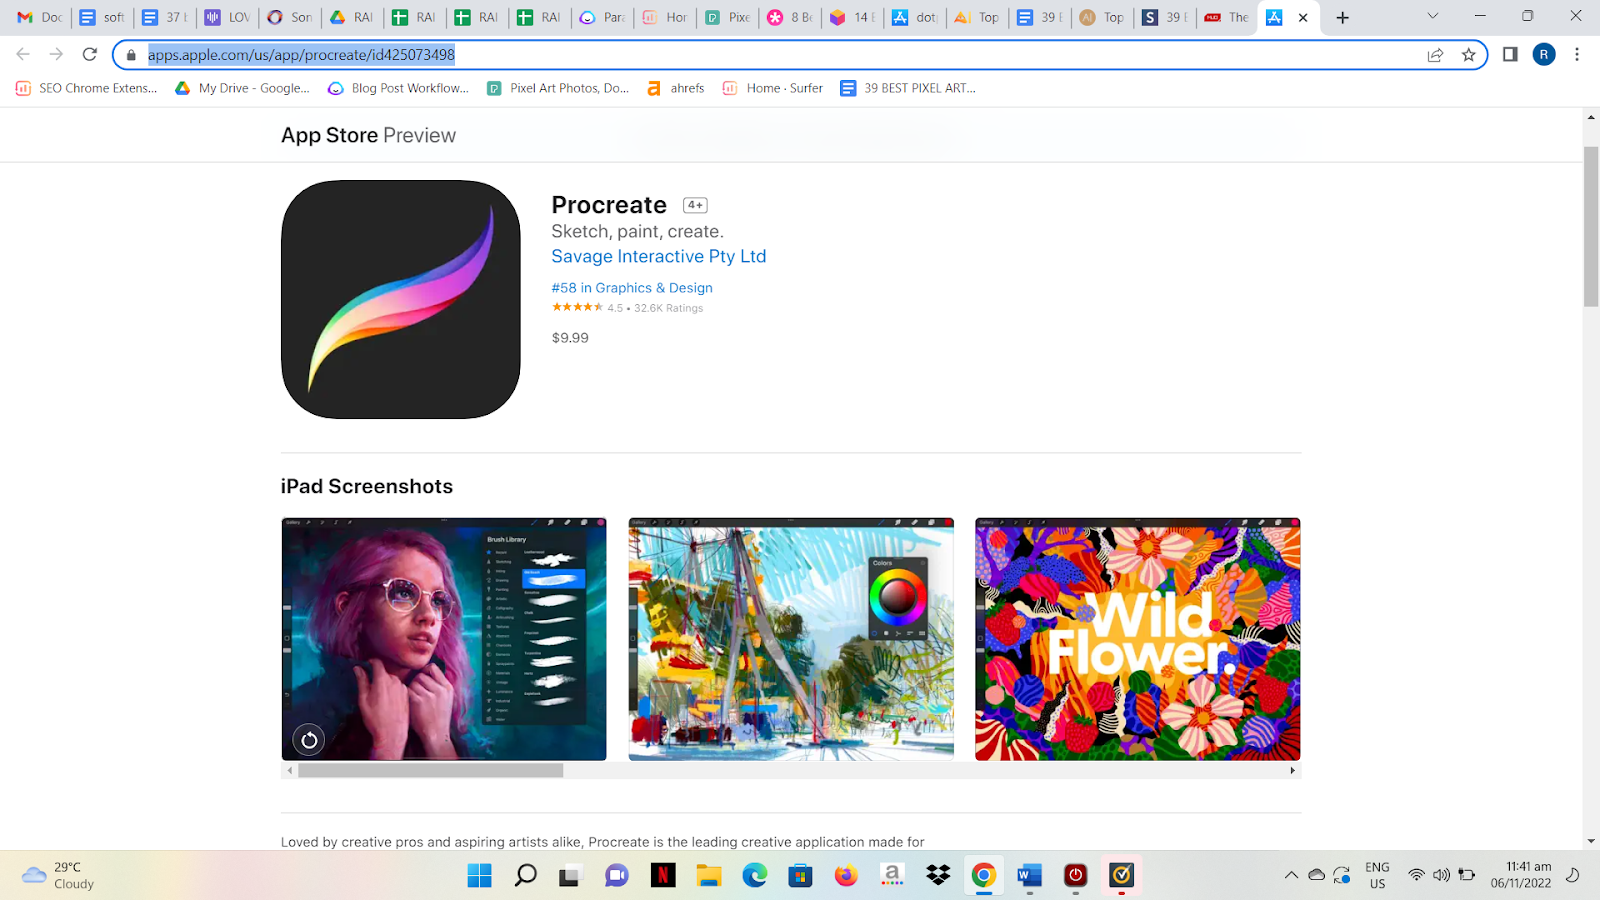 Procreate is the number one creative tool used by professionals and aspiring artists on iPad. 